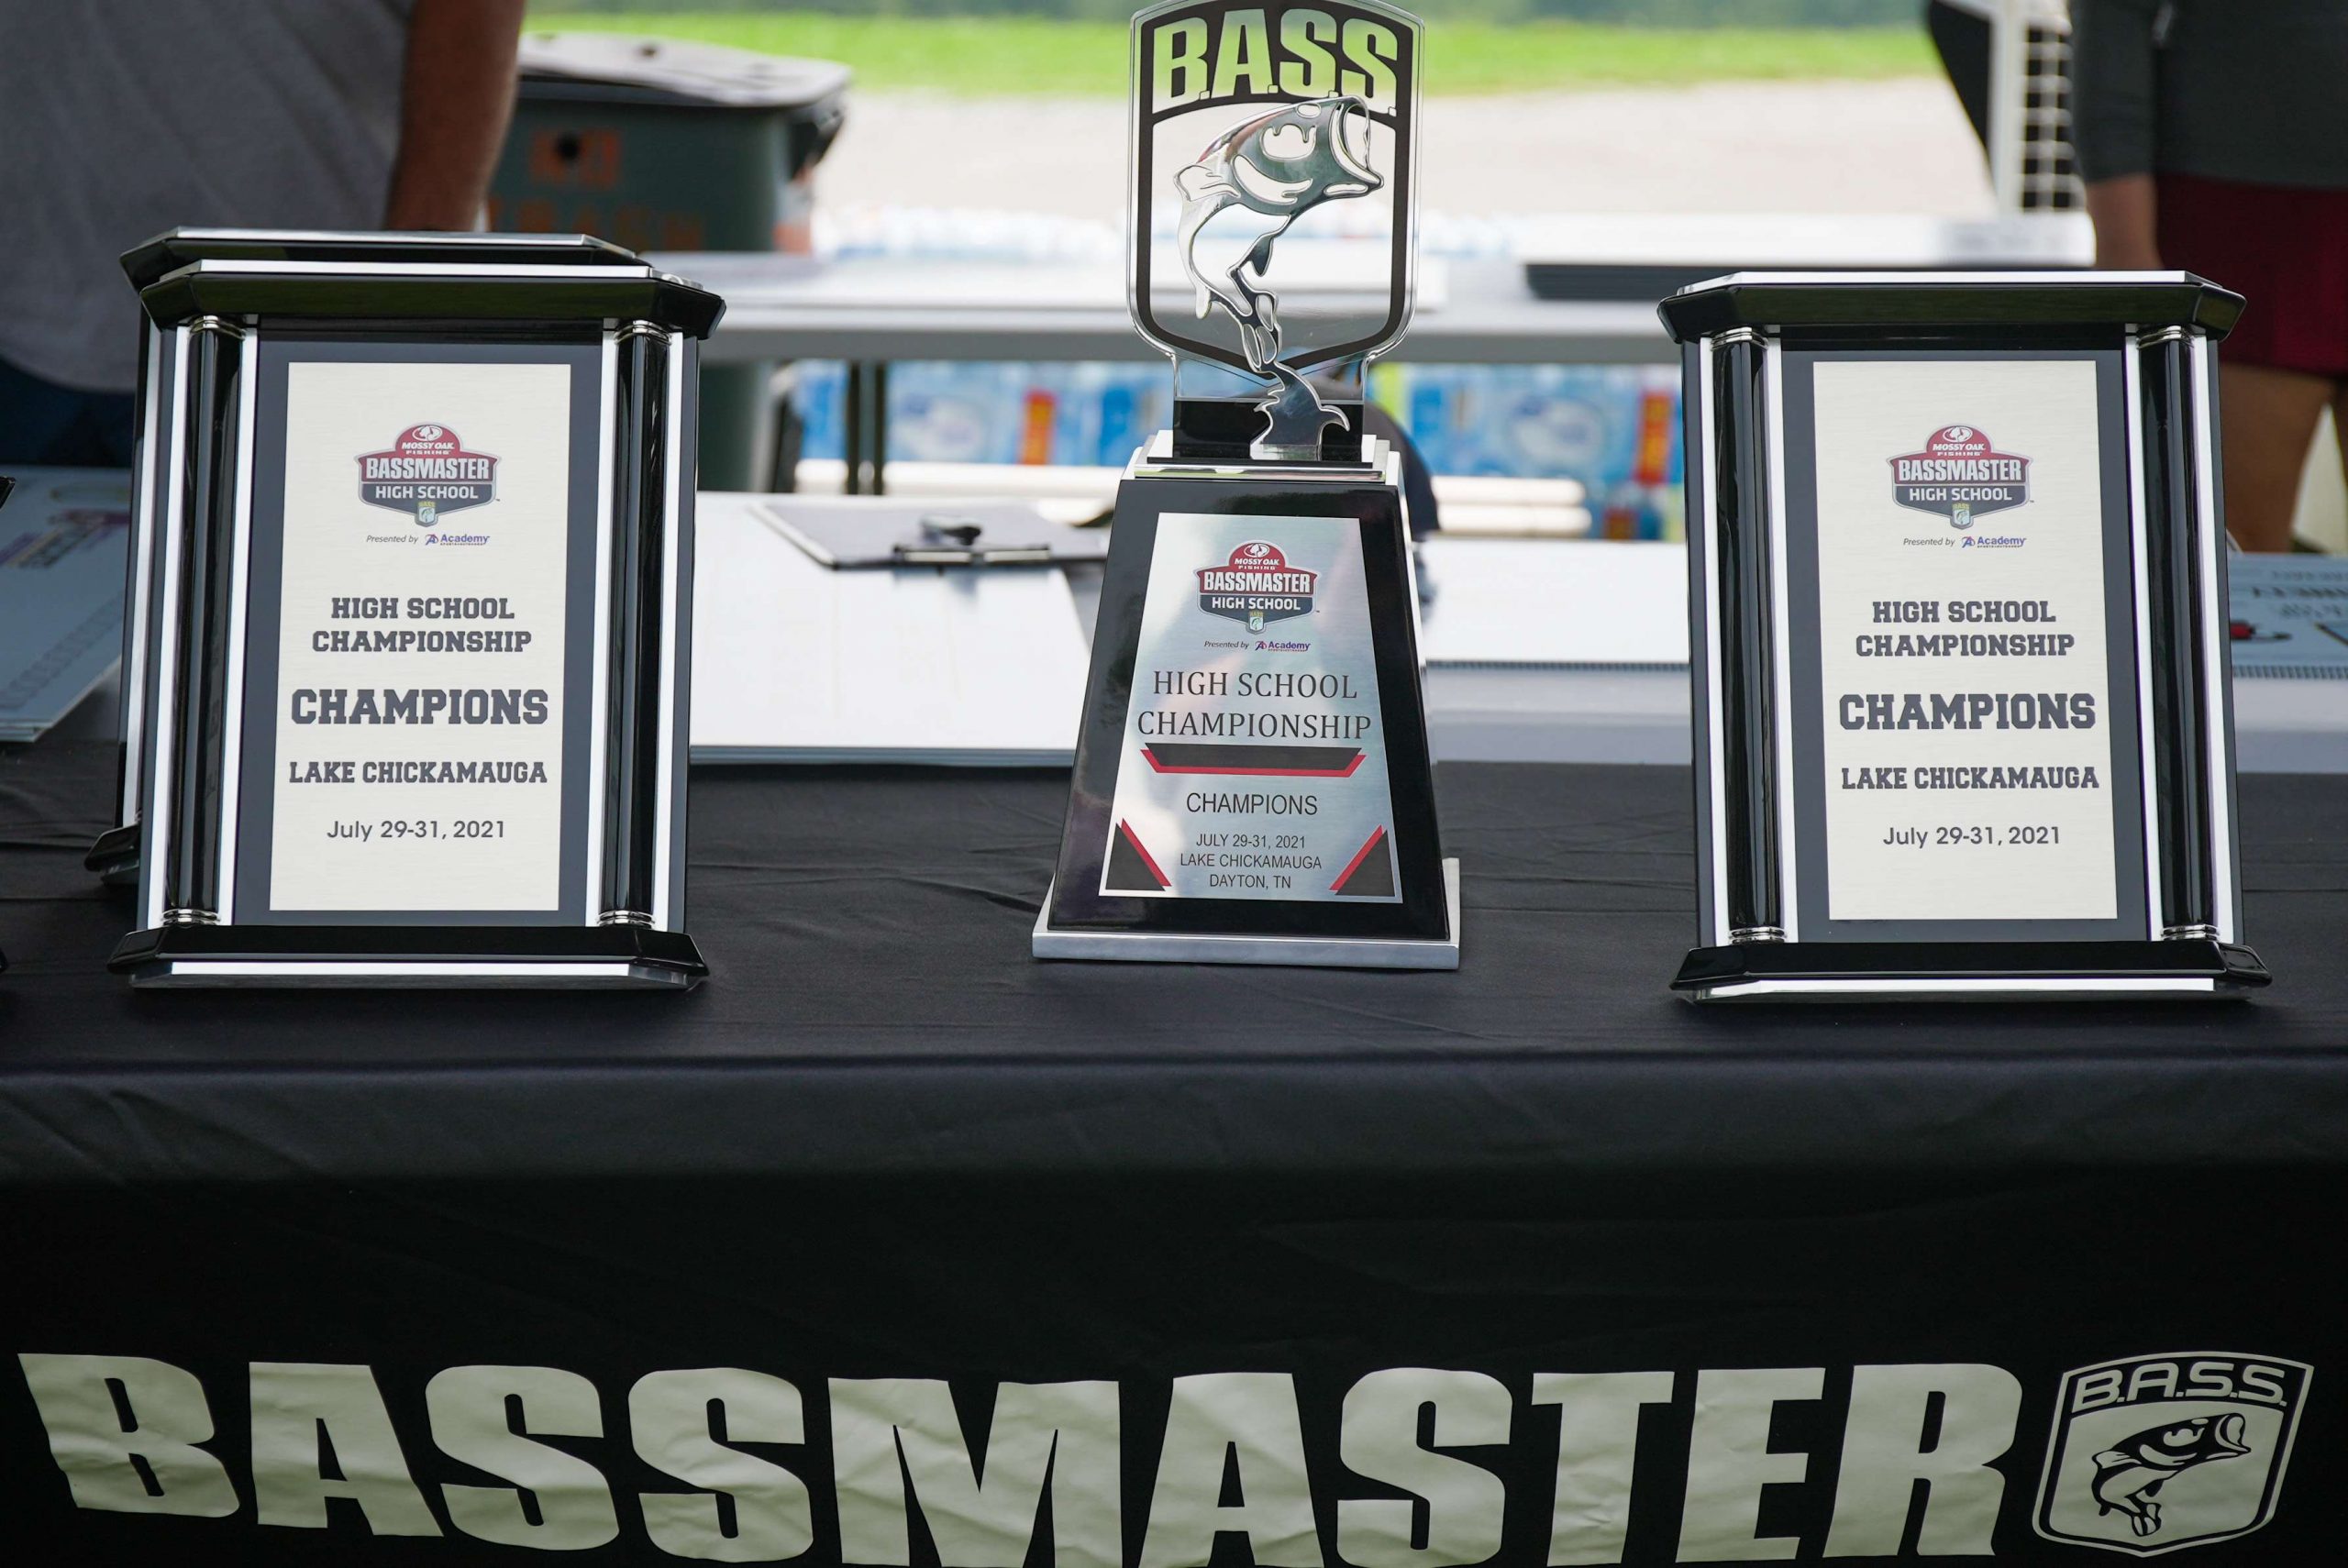 It is time to crown a new High School champion! The Top 12 teams from the 2021 Mossy Oak Fishing Bassmaster High School Championship presented by Academy Sports + Outdoors are ready to weigh in.